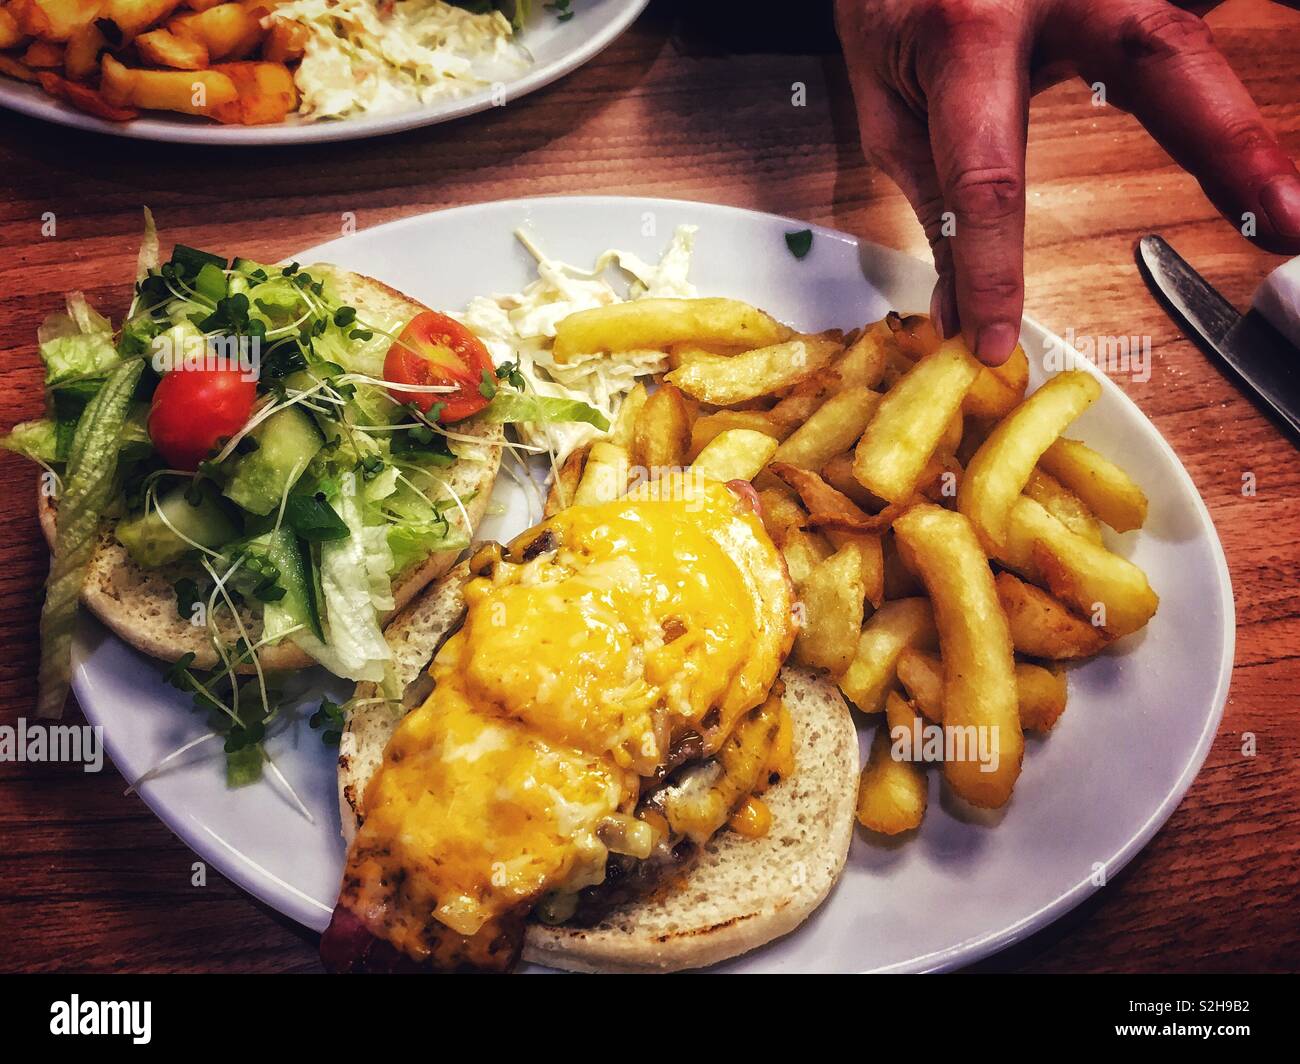 A hand steals a chip from a plate with a gourmet cheese burger and salad Stock Photo